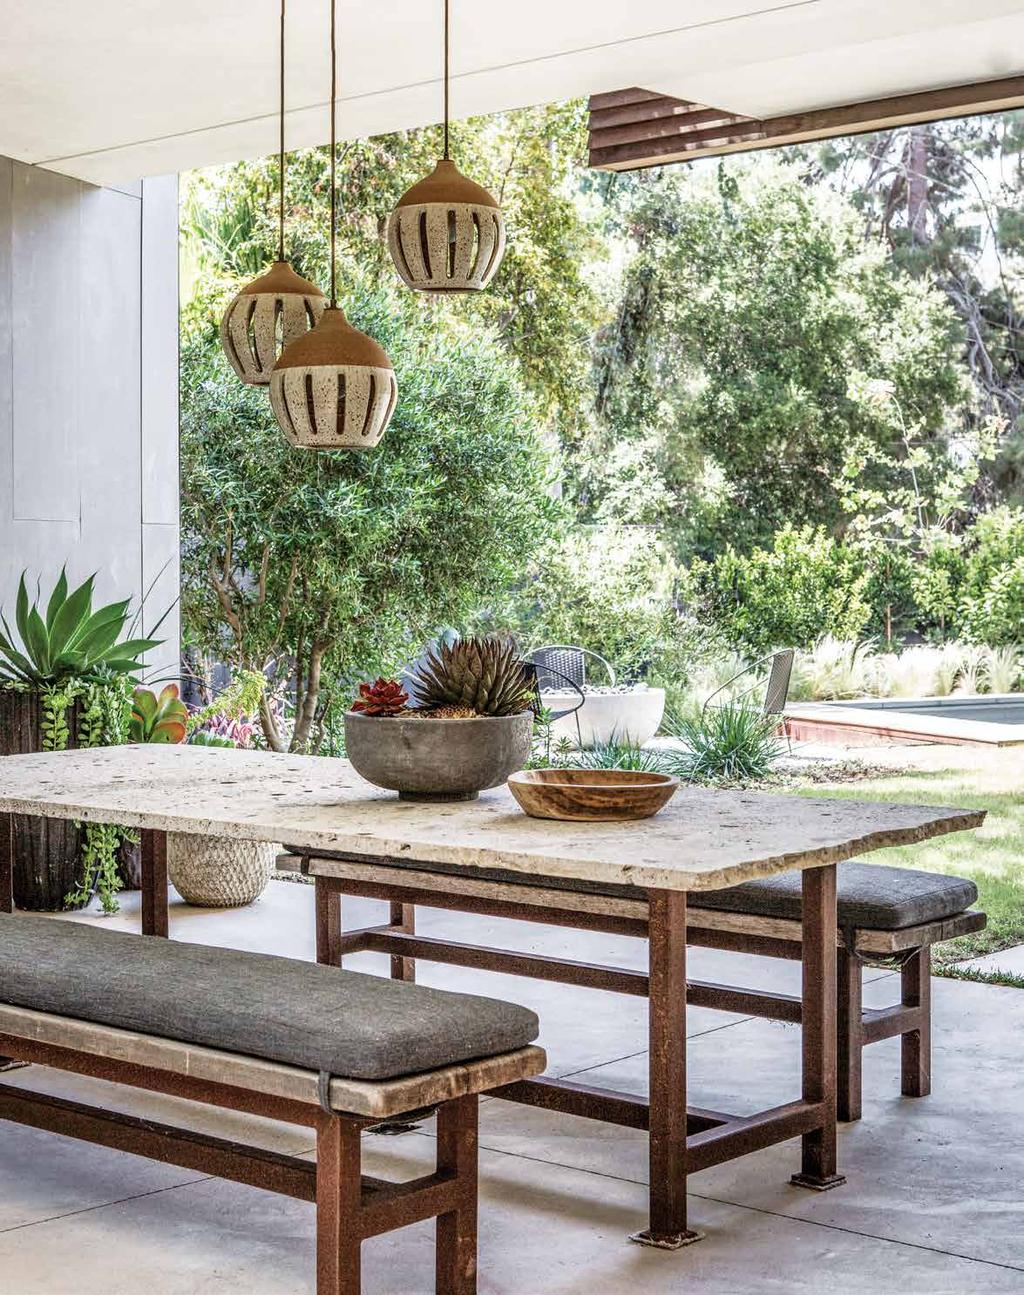 Opposite: In the outdoor dining space, which looks toward the pool deck, ceramic pendants by Heather Levine hang above a